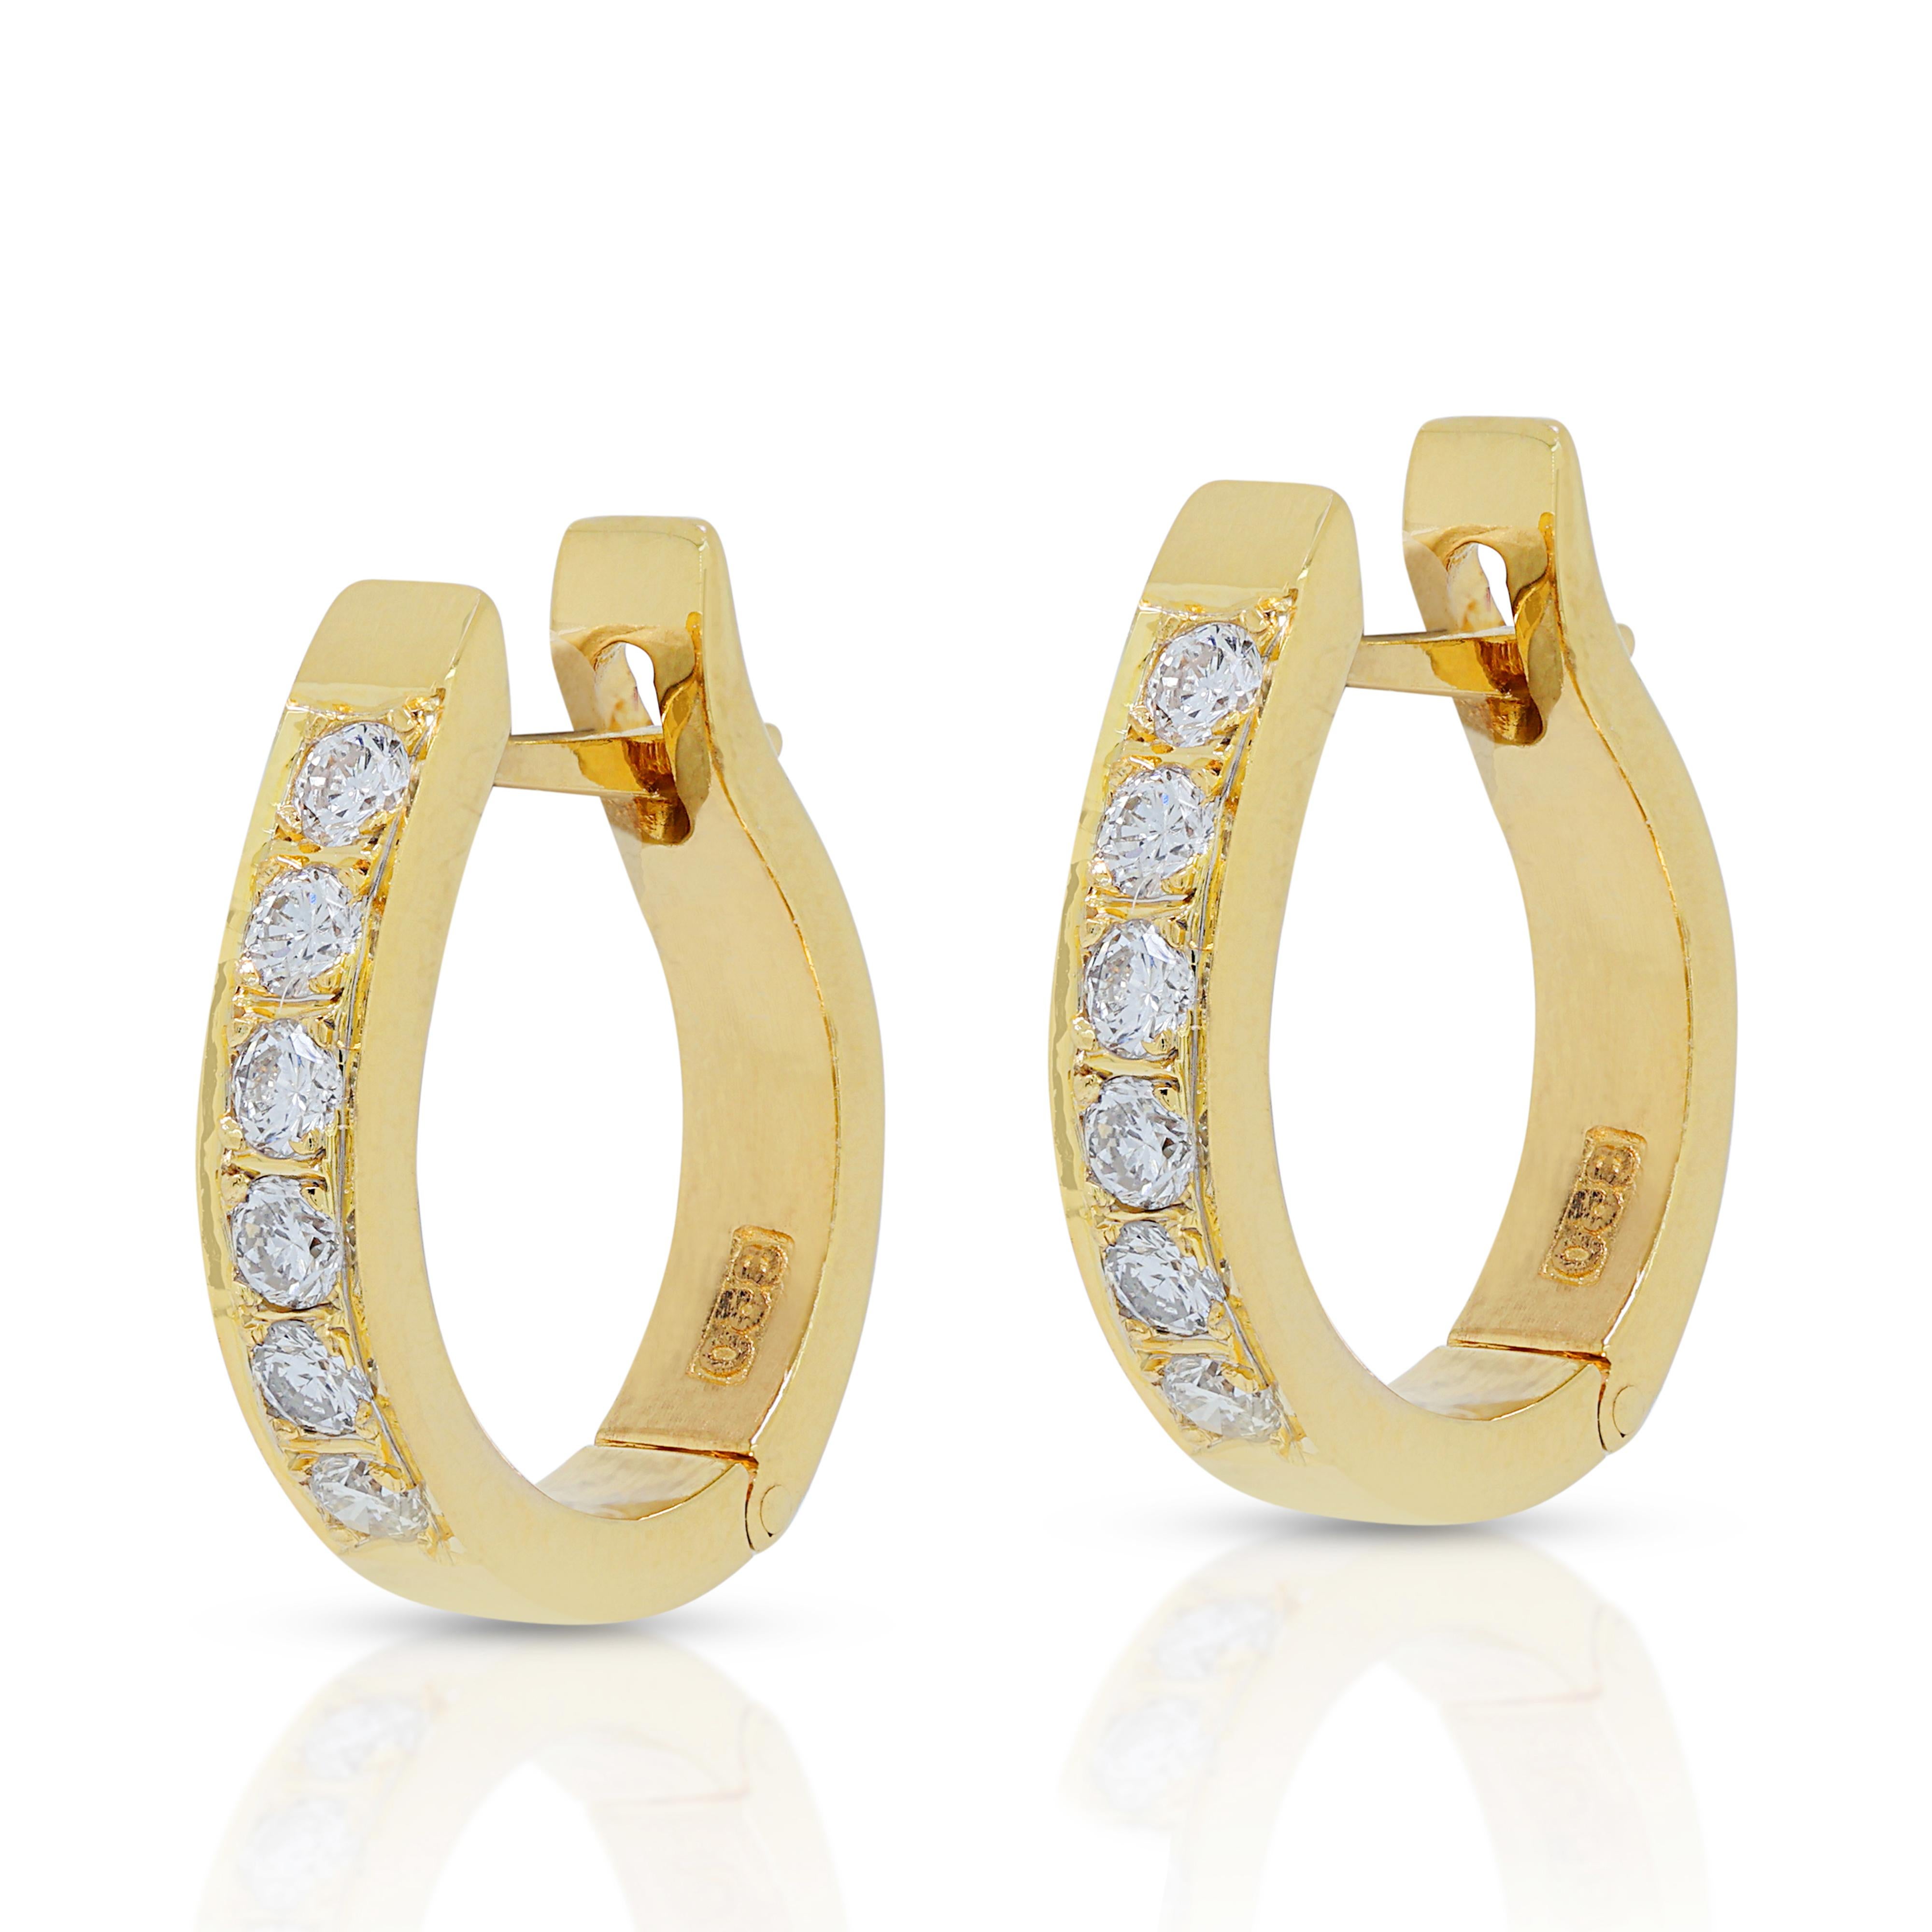 Beautiful 0.36ct Diamonds Hoop Earrings in 18K Yellow Gold In Excellent Condition For Sale In רמת גן, IL